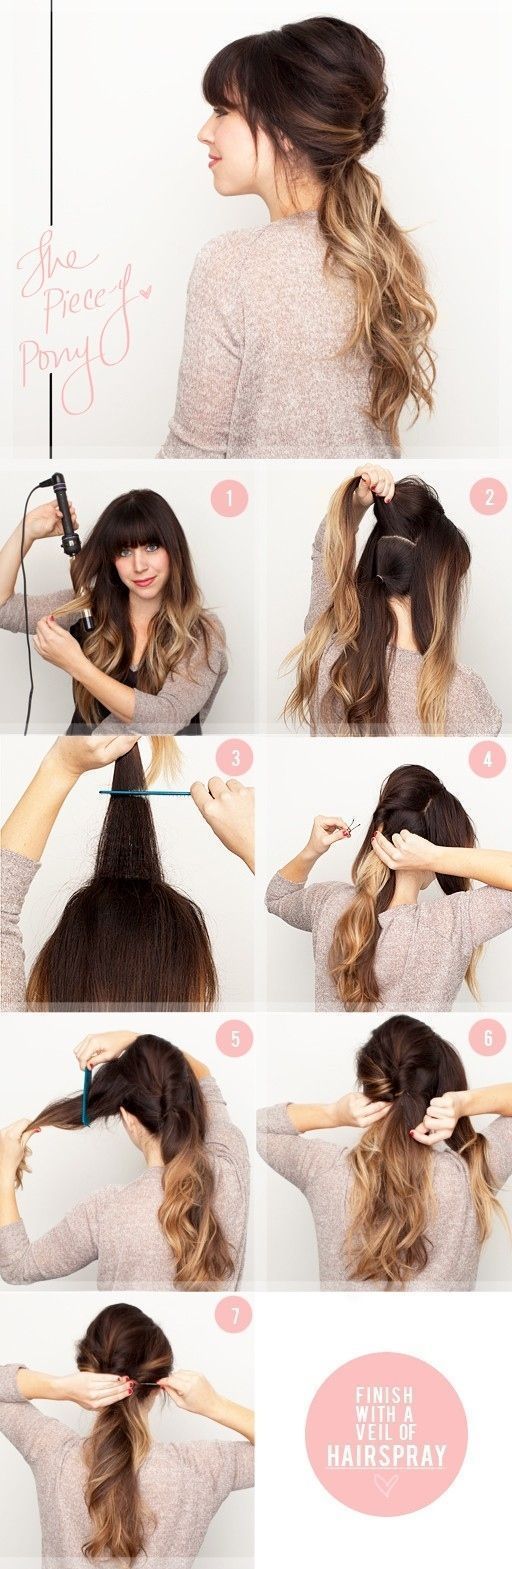 Cool DIY hairstyles for girls